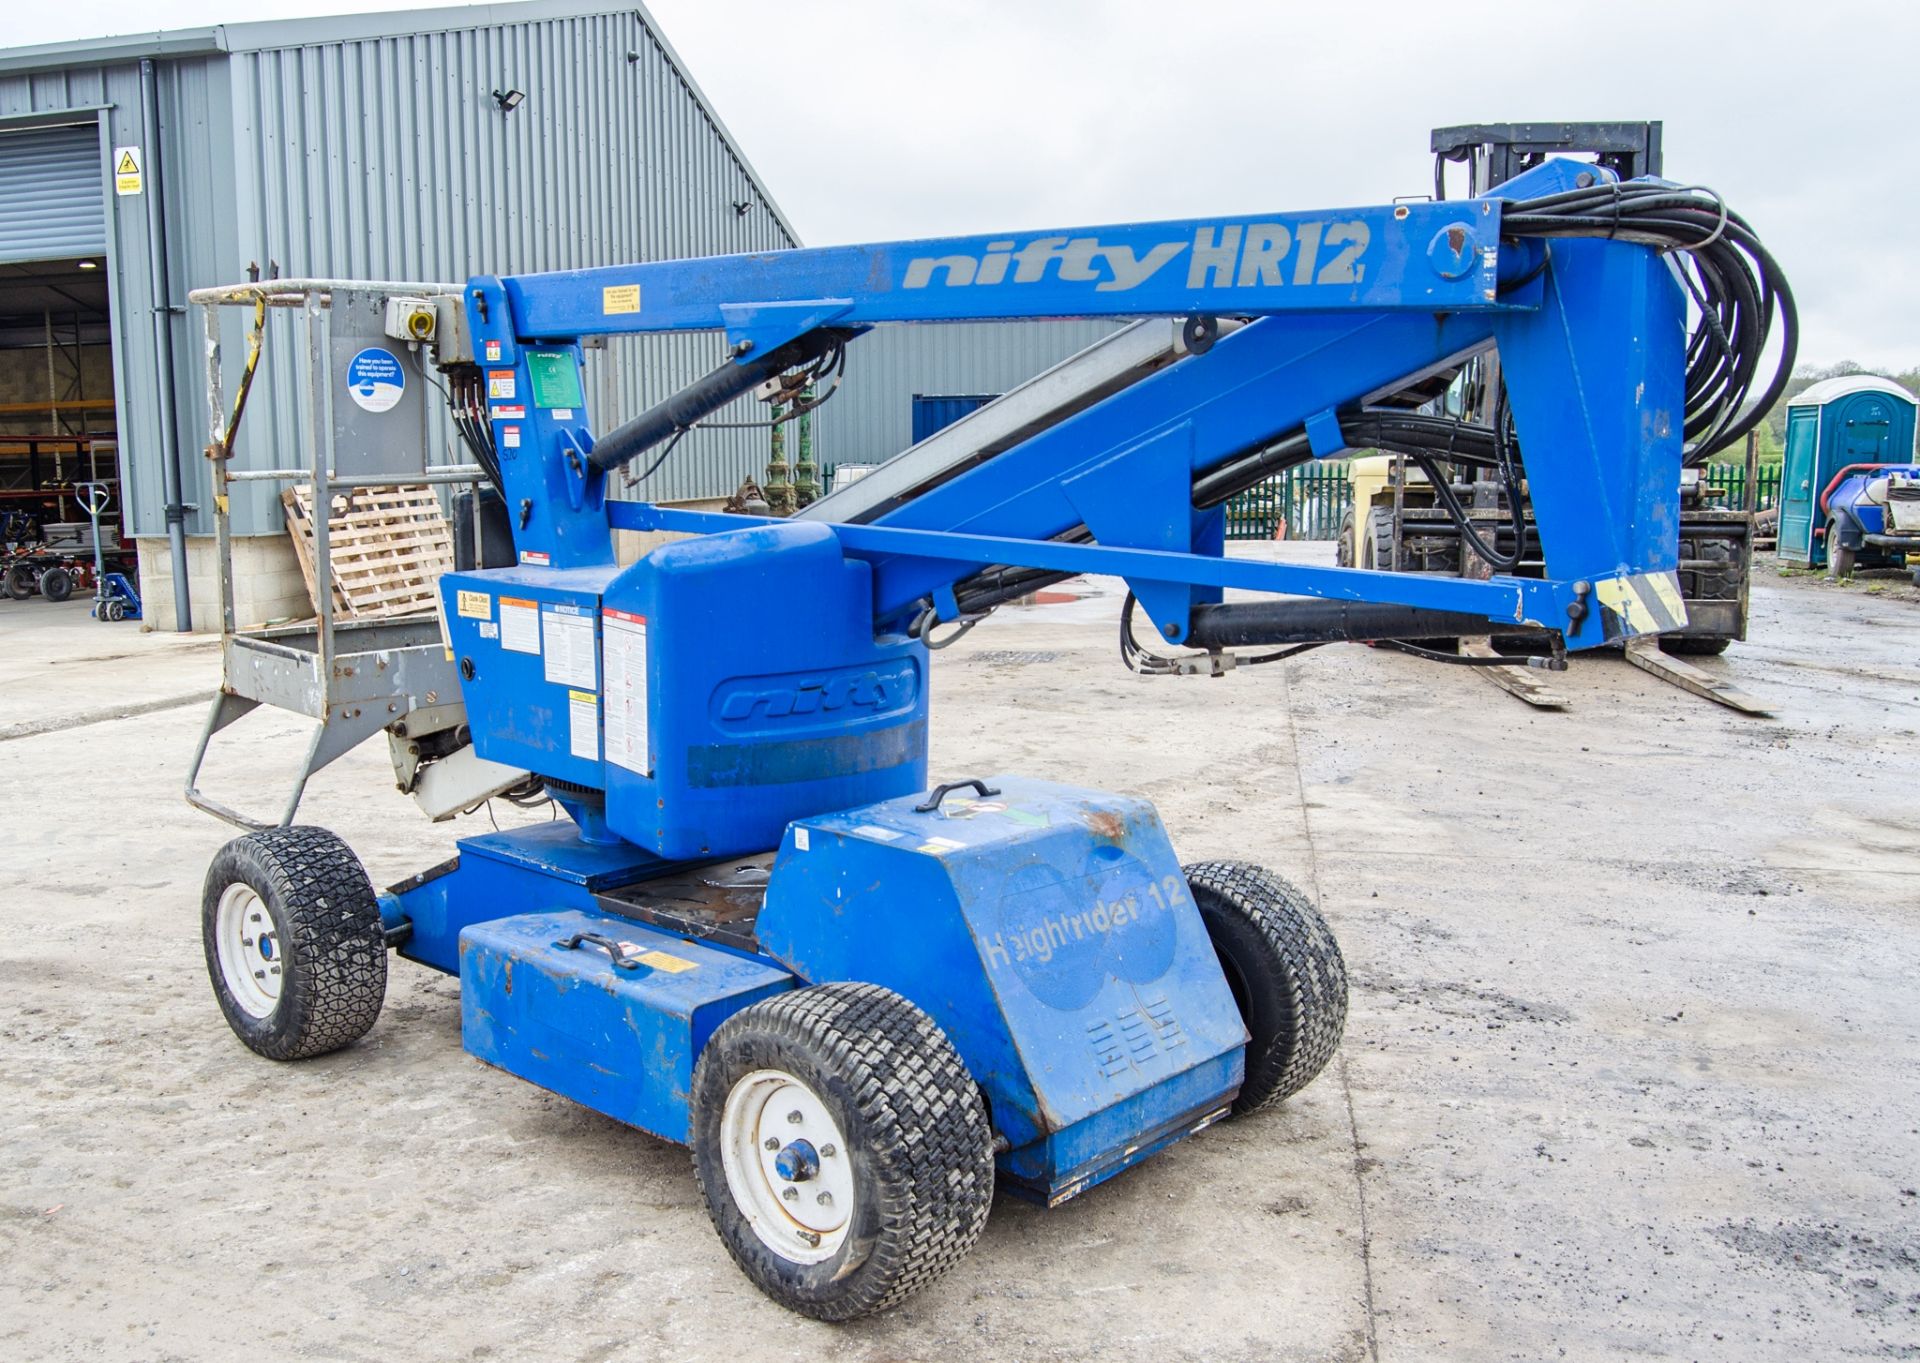 Nifty HR12 diesel/battery electric articulated boom access platform Year: 2011 S/N: 1220892 HYP175 - Image 4 of 13